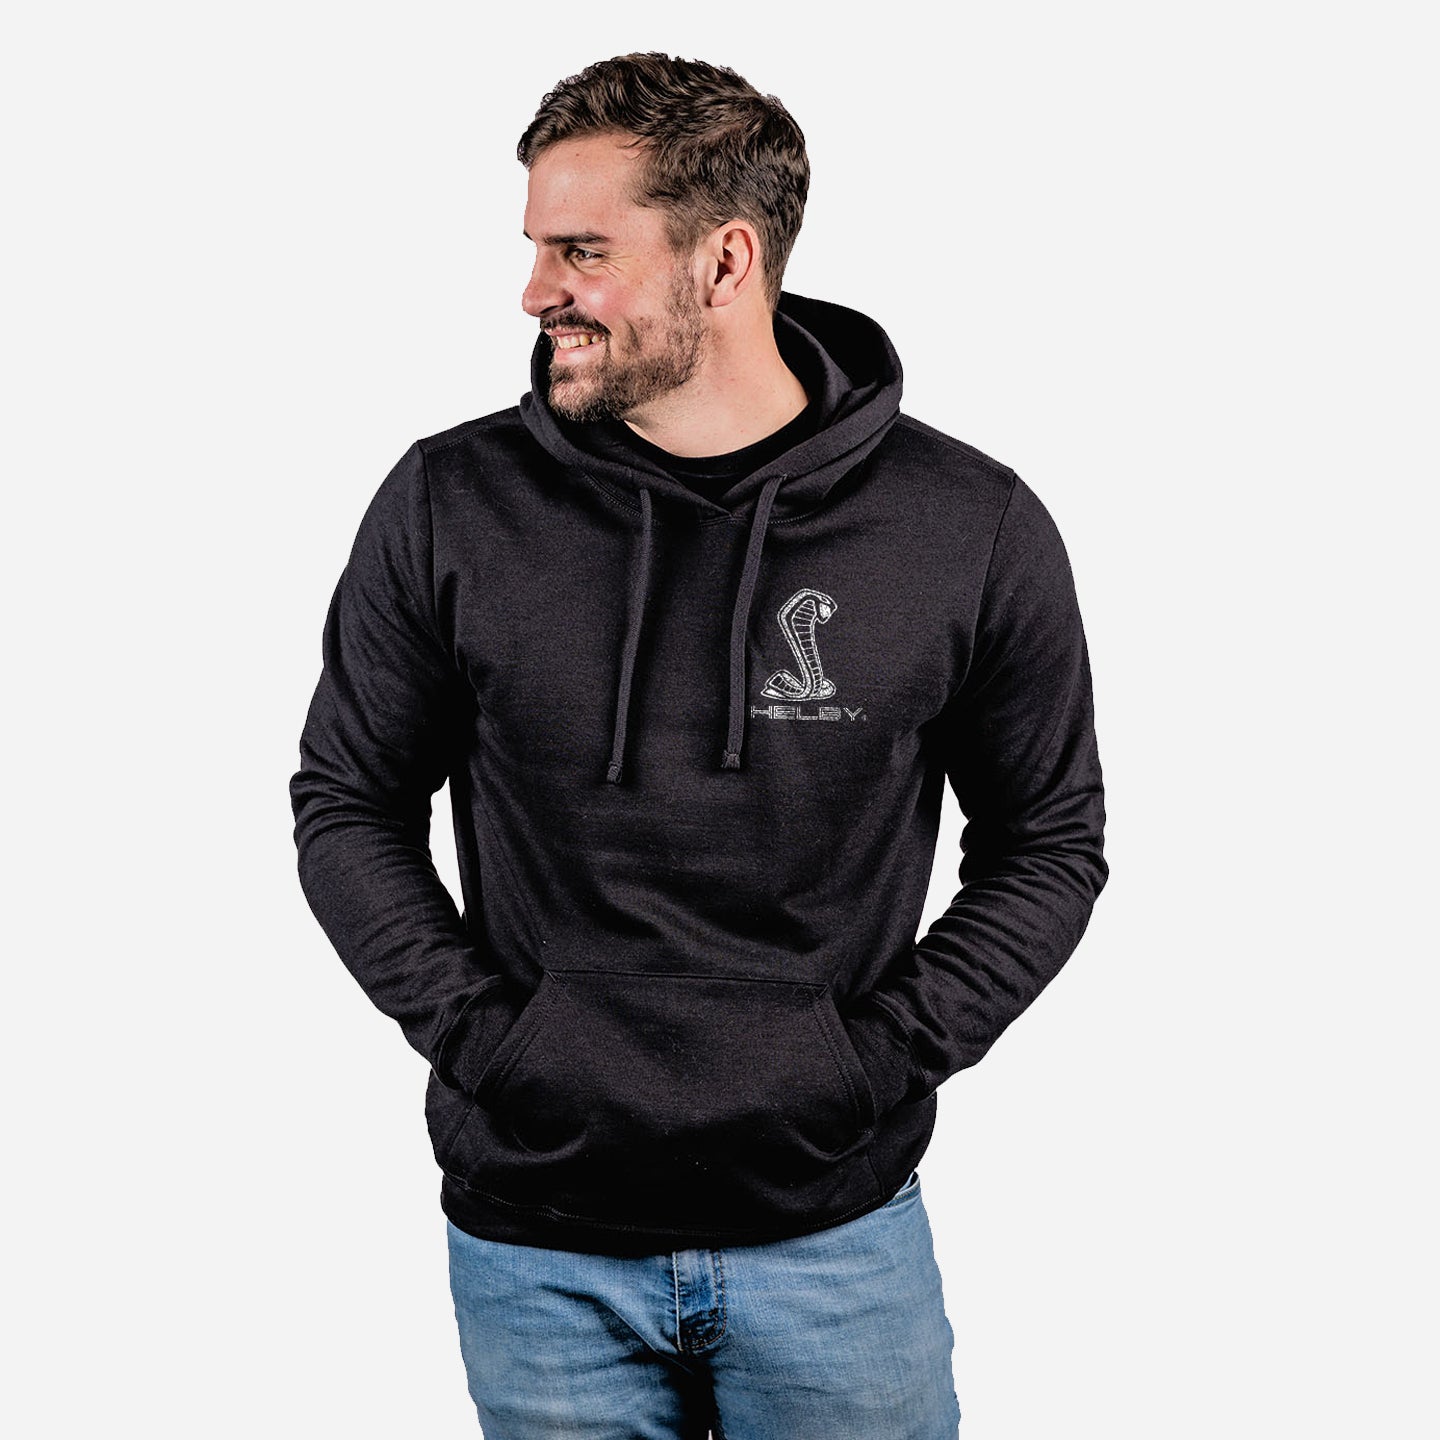 Meant to be Driven - Black Hoodie